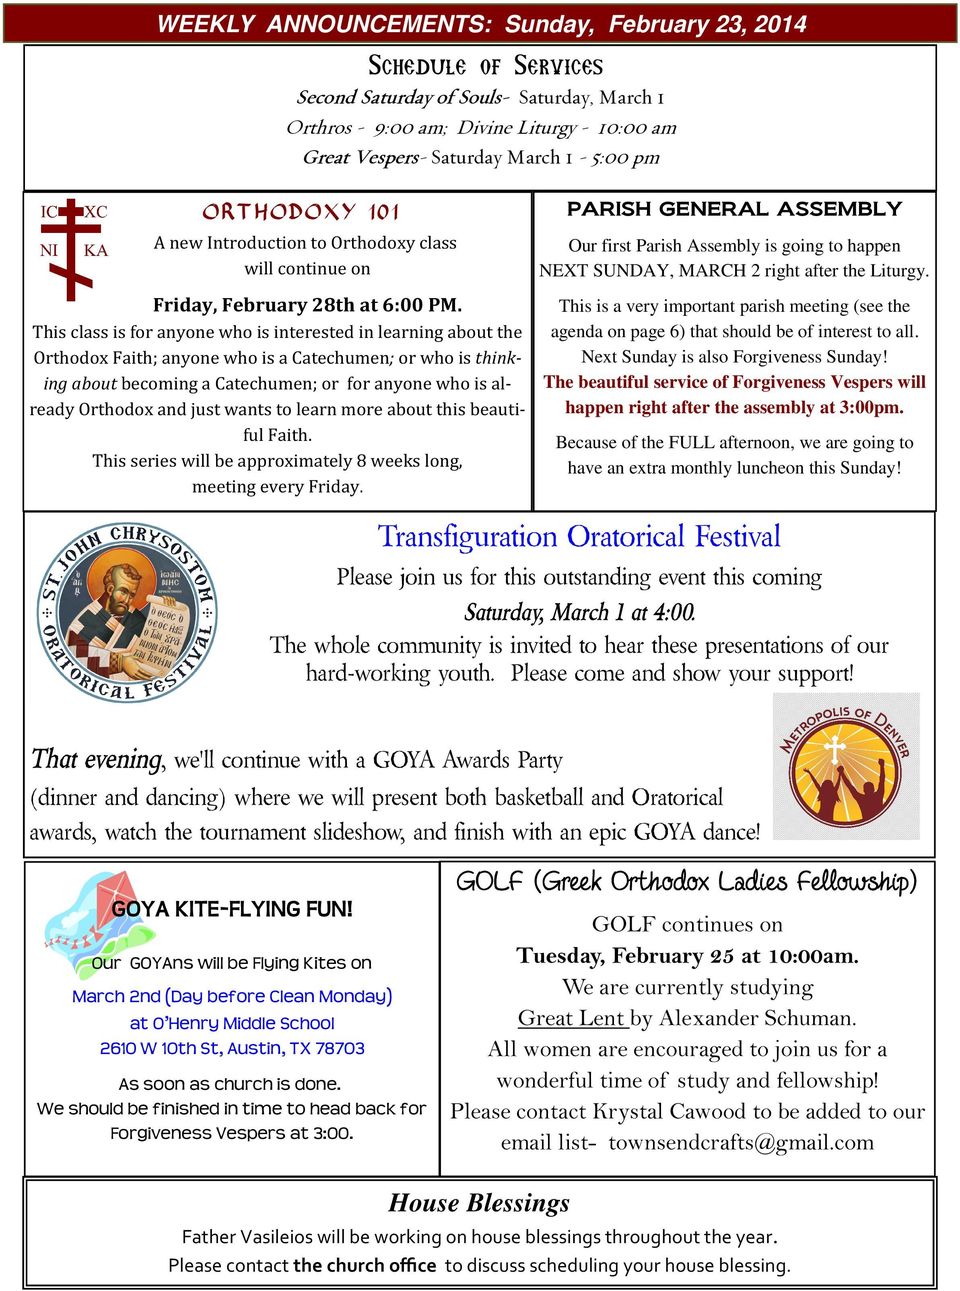 This class is for anyone who is interested in learning about the Orthodox Faith; anyone who is a Catechumen; or who is thinking about becoming a Catechumen; or for anyone who is already Orthodox and